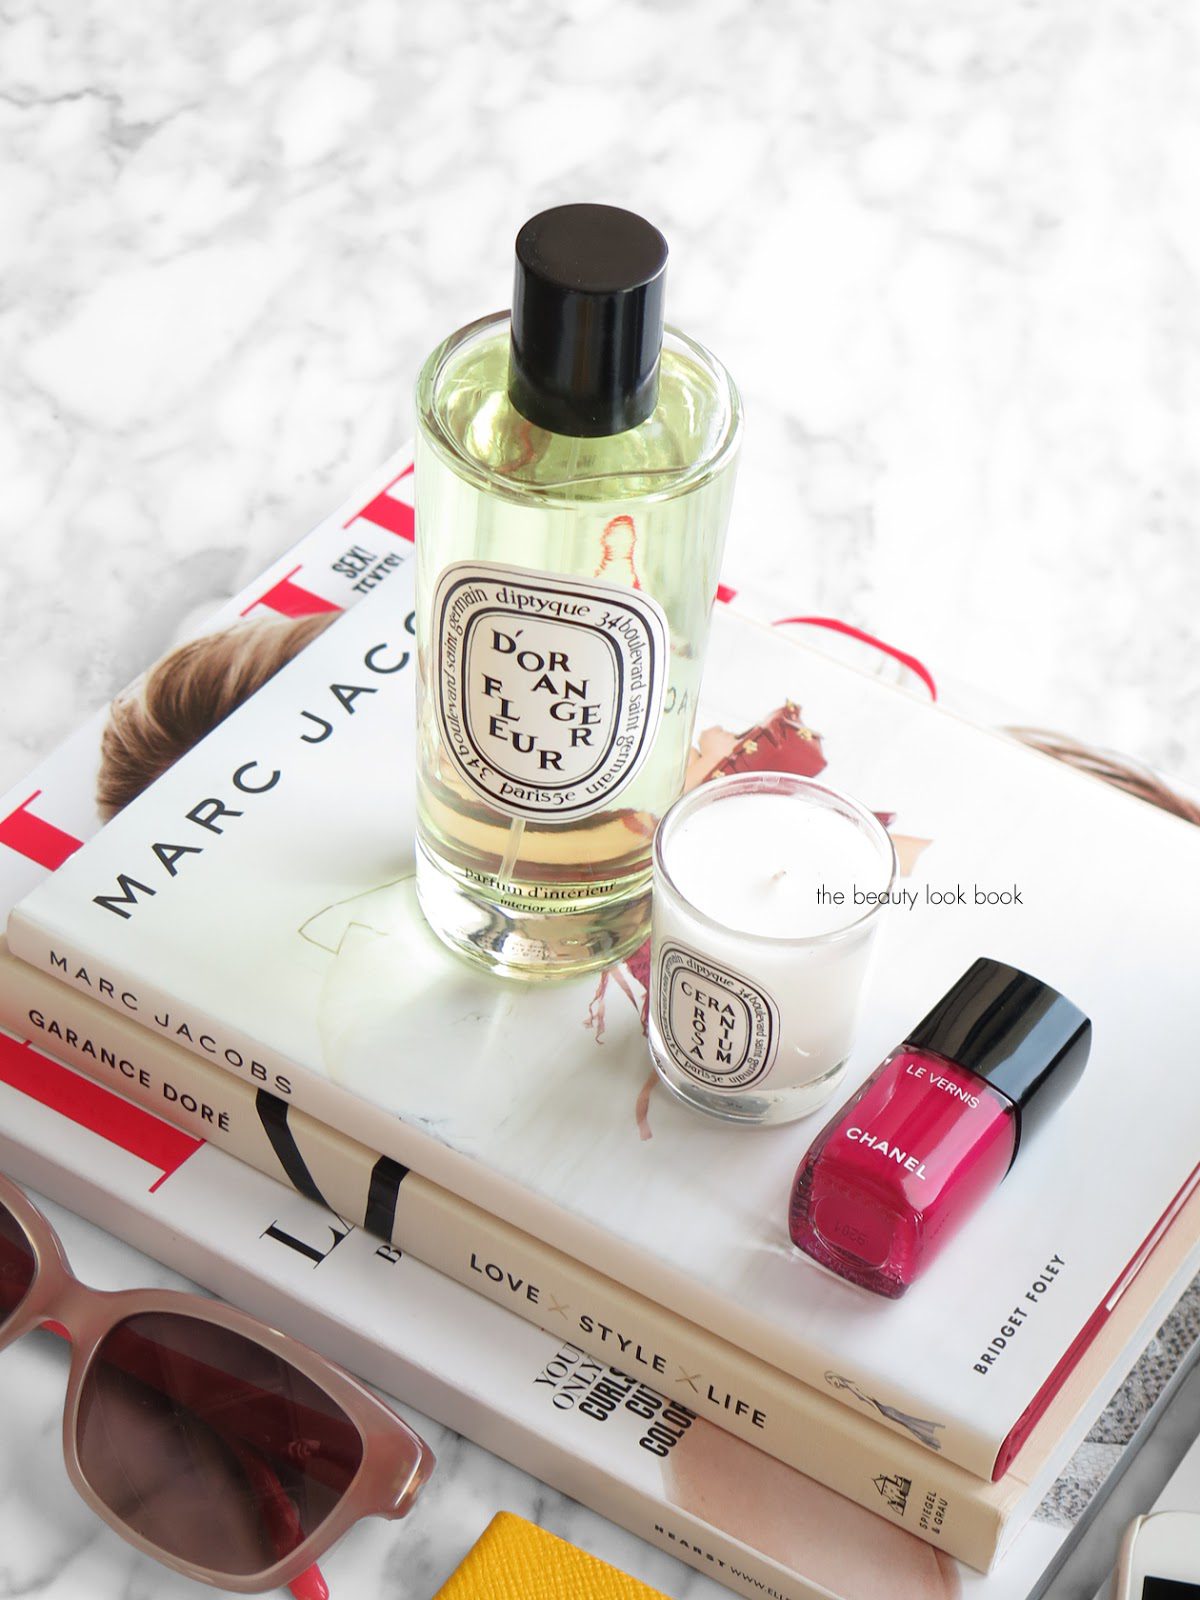 Diptyque Room Sprays Fleur D'Oranger and Gingembre - The Beauty Look Book